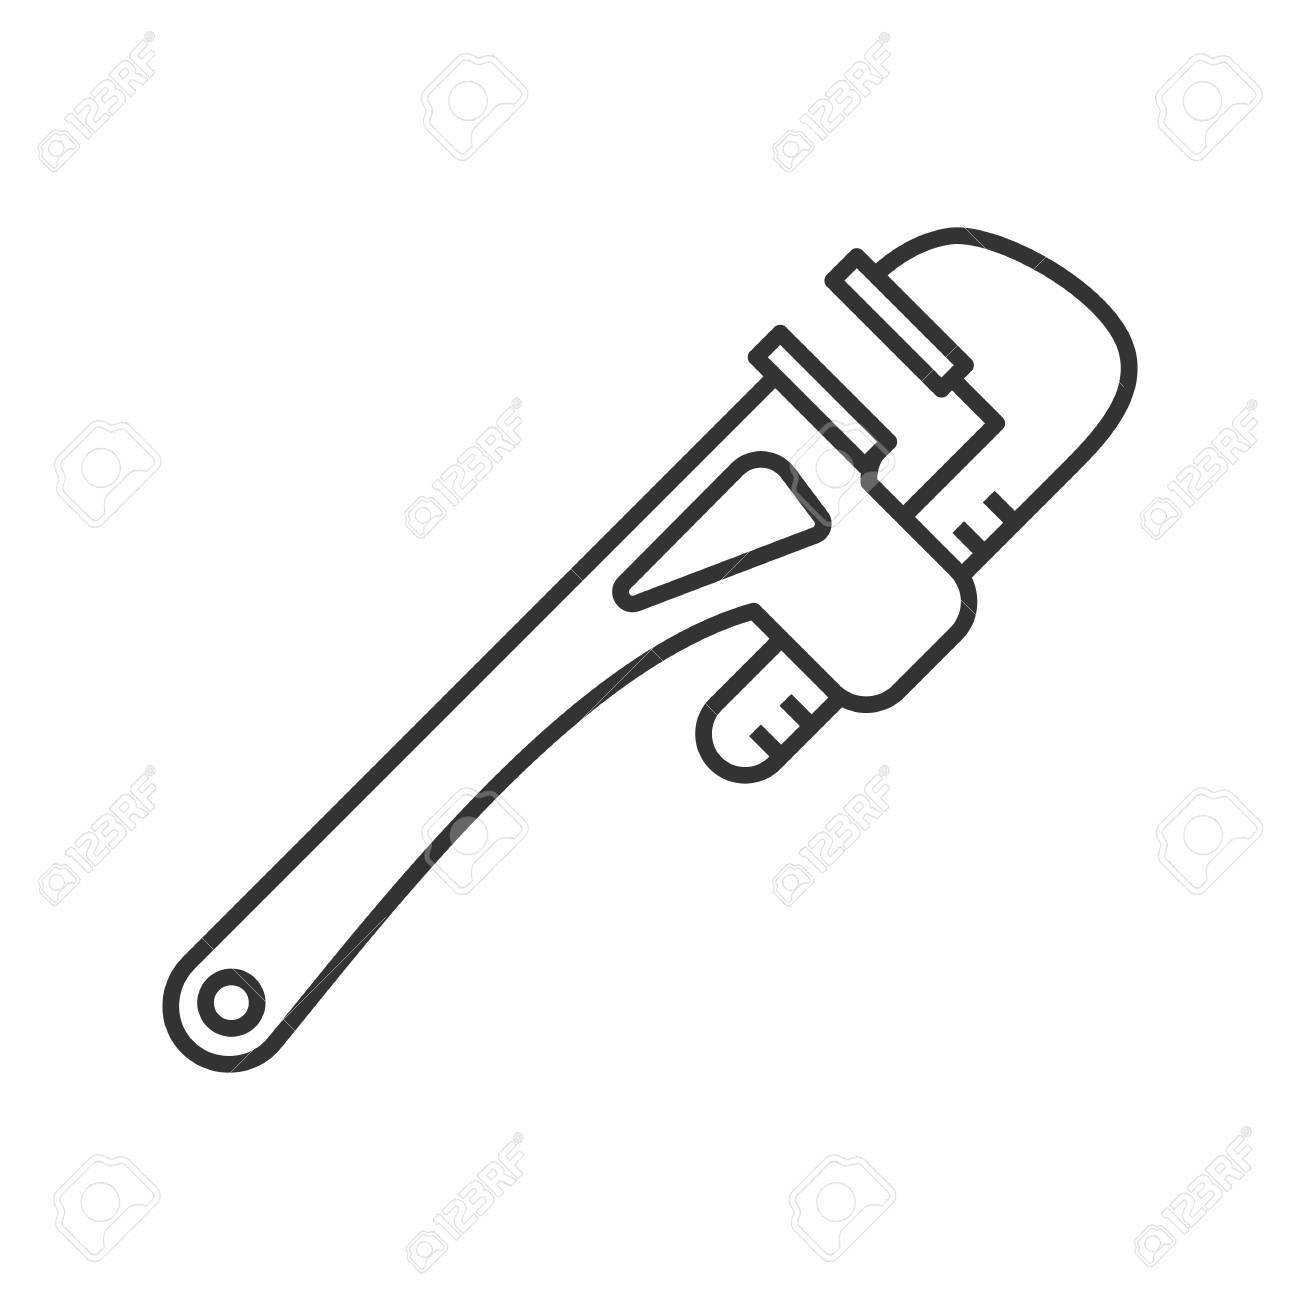 Monkey wrench linear icon. Thin line illustration. Spanner. Contour...